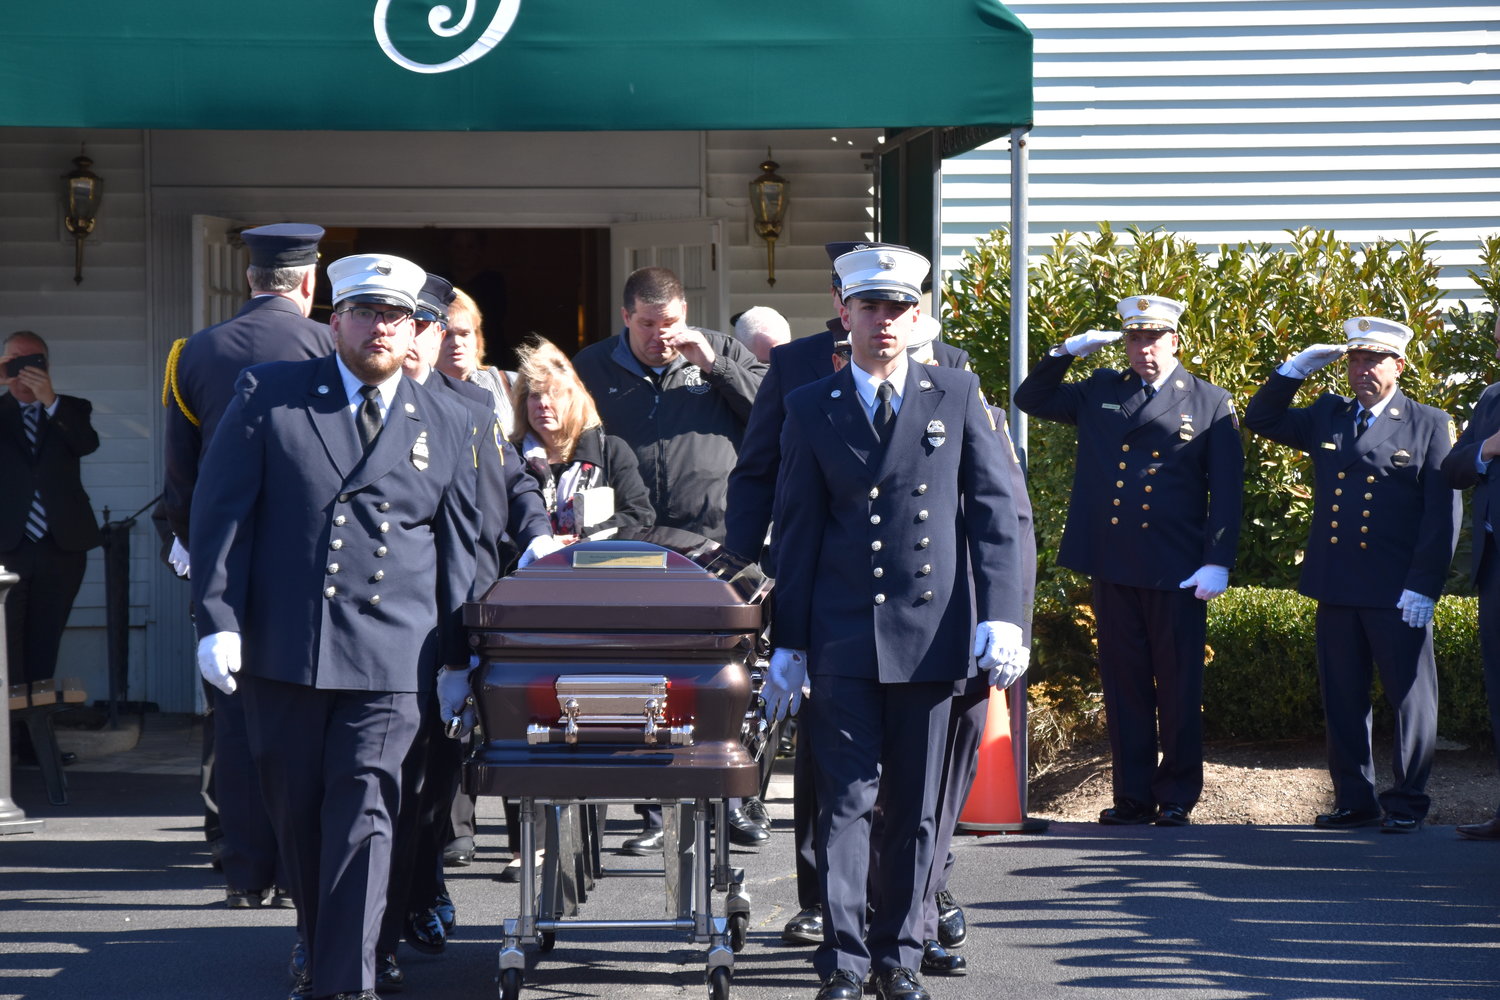 Rockville Centre Firefighters provide a proper send-off for the Ex-Chief Robert Seaman.